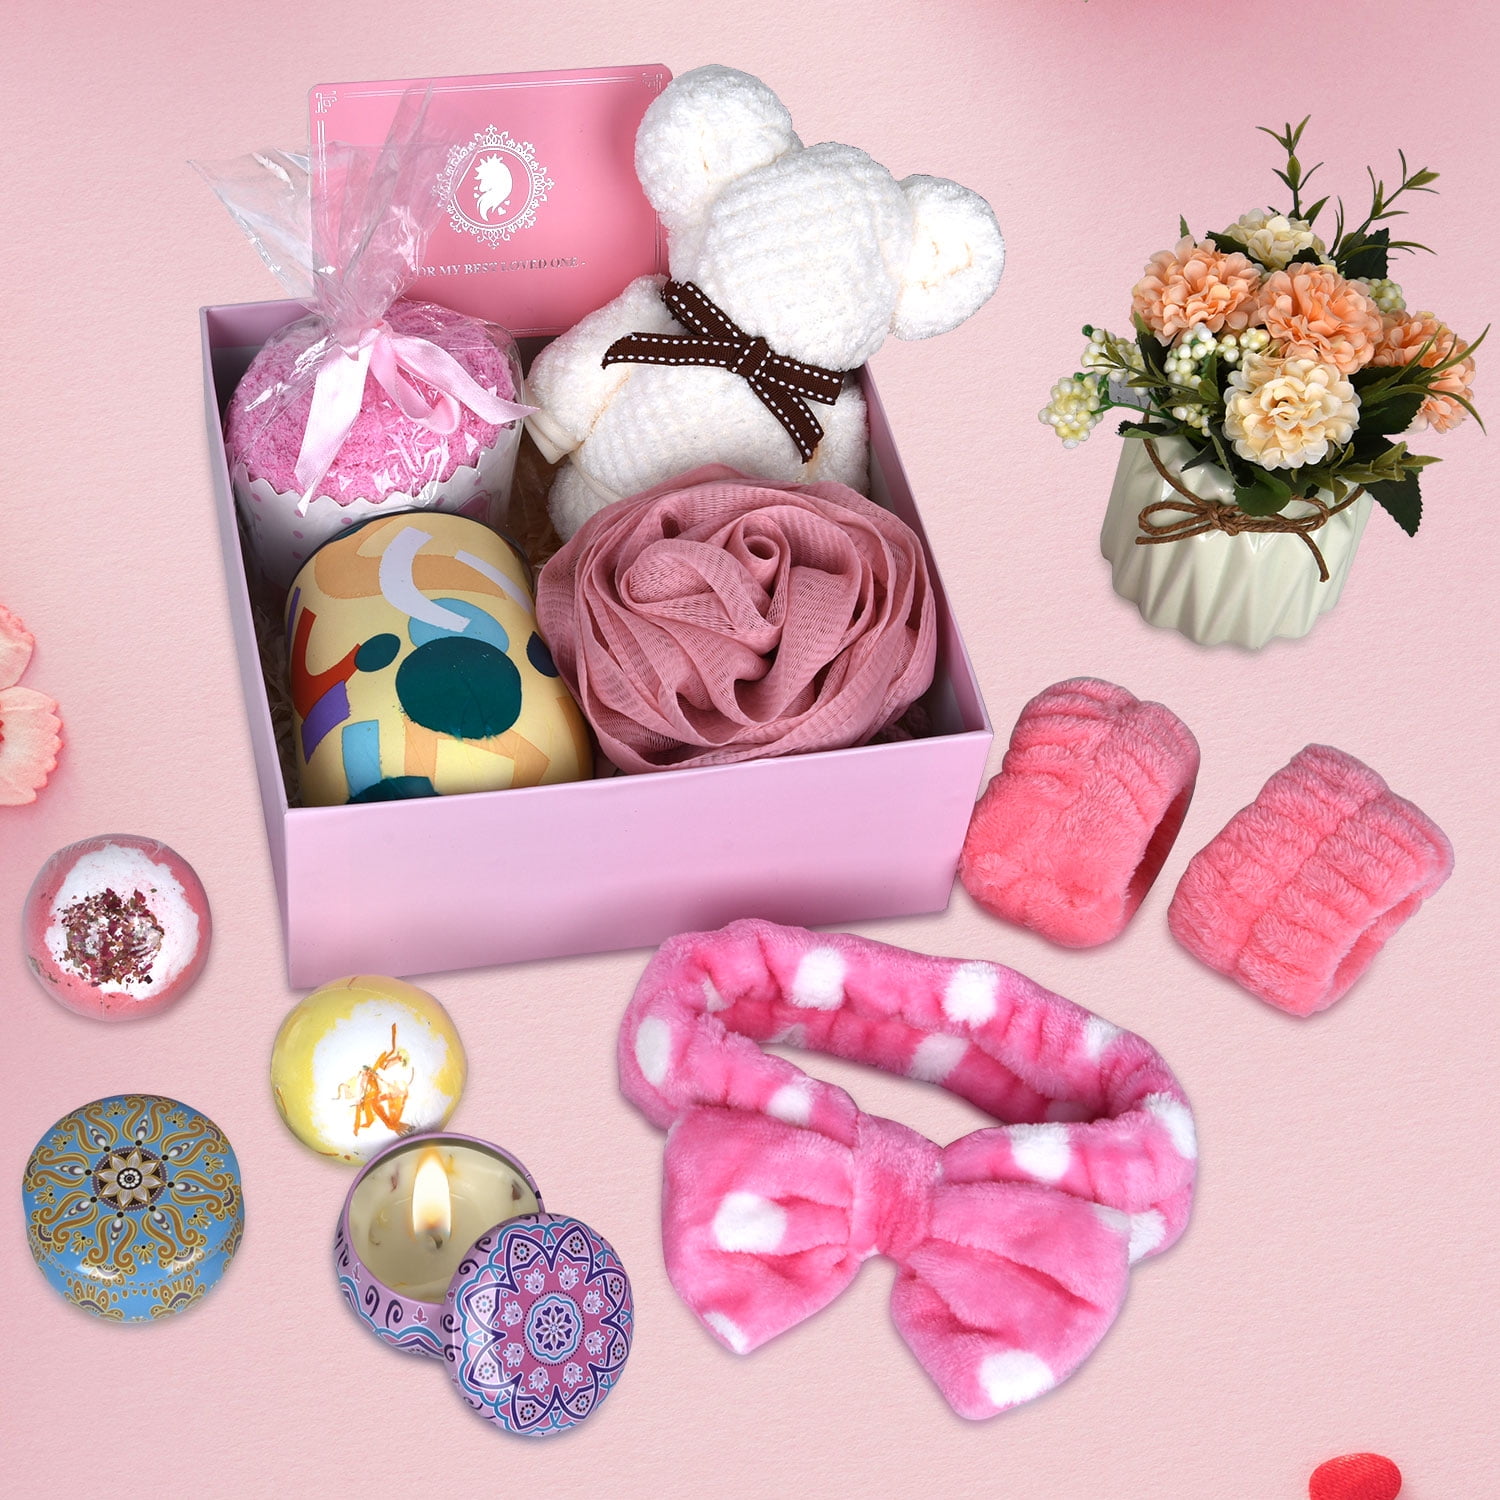  Christmas Gifts for Women, Birthday Gifts Basket for Friends  Gifts for Her Girlfriend Sister Mom Unique Holiday Gifts Box Jade Roller  Bath Bombs Candle Tumbler Cocoa Butter Cozy Socks : Home